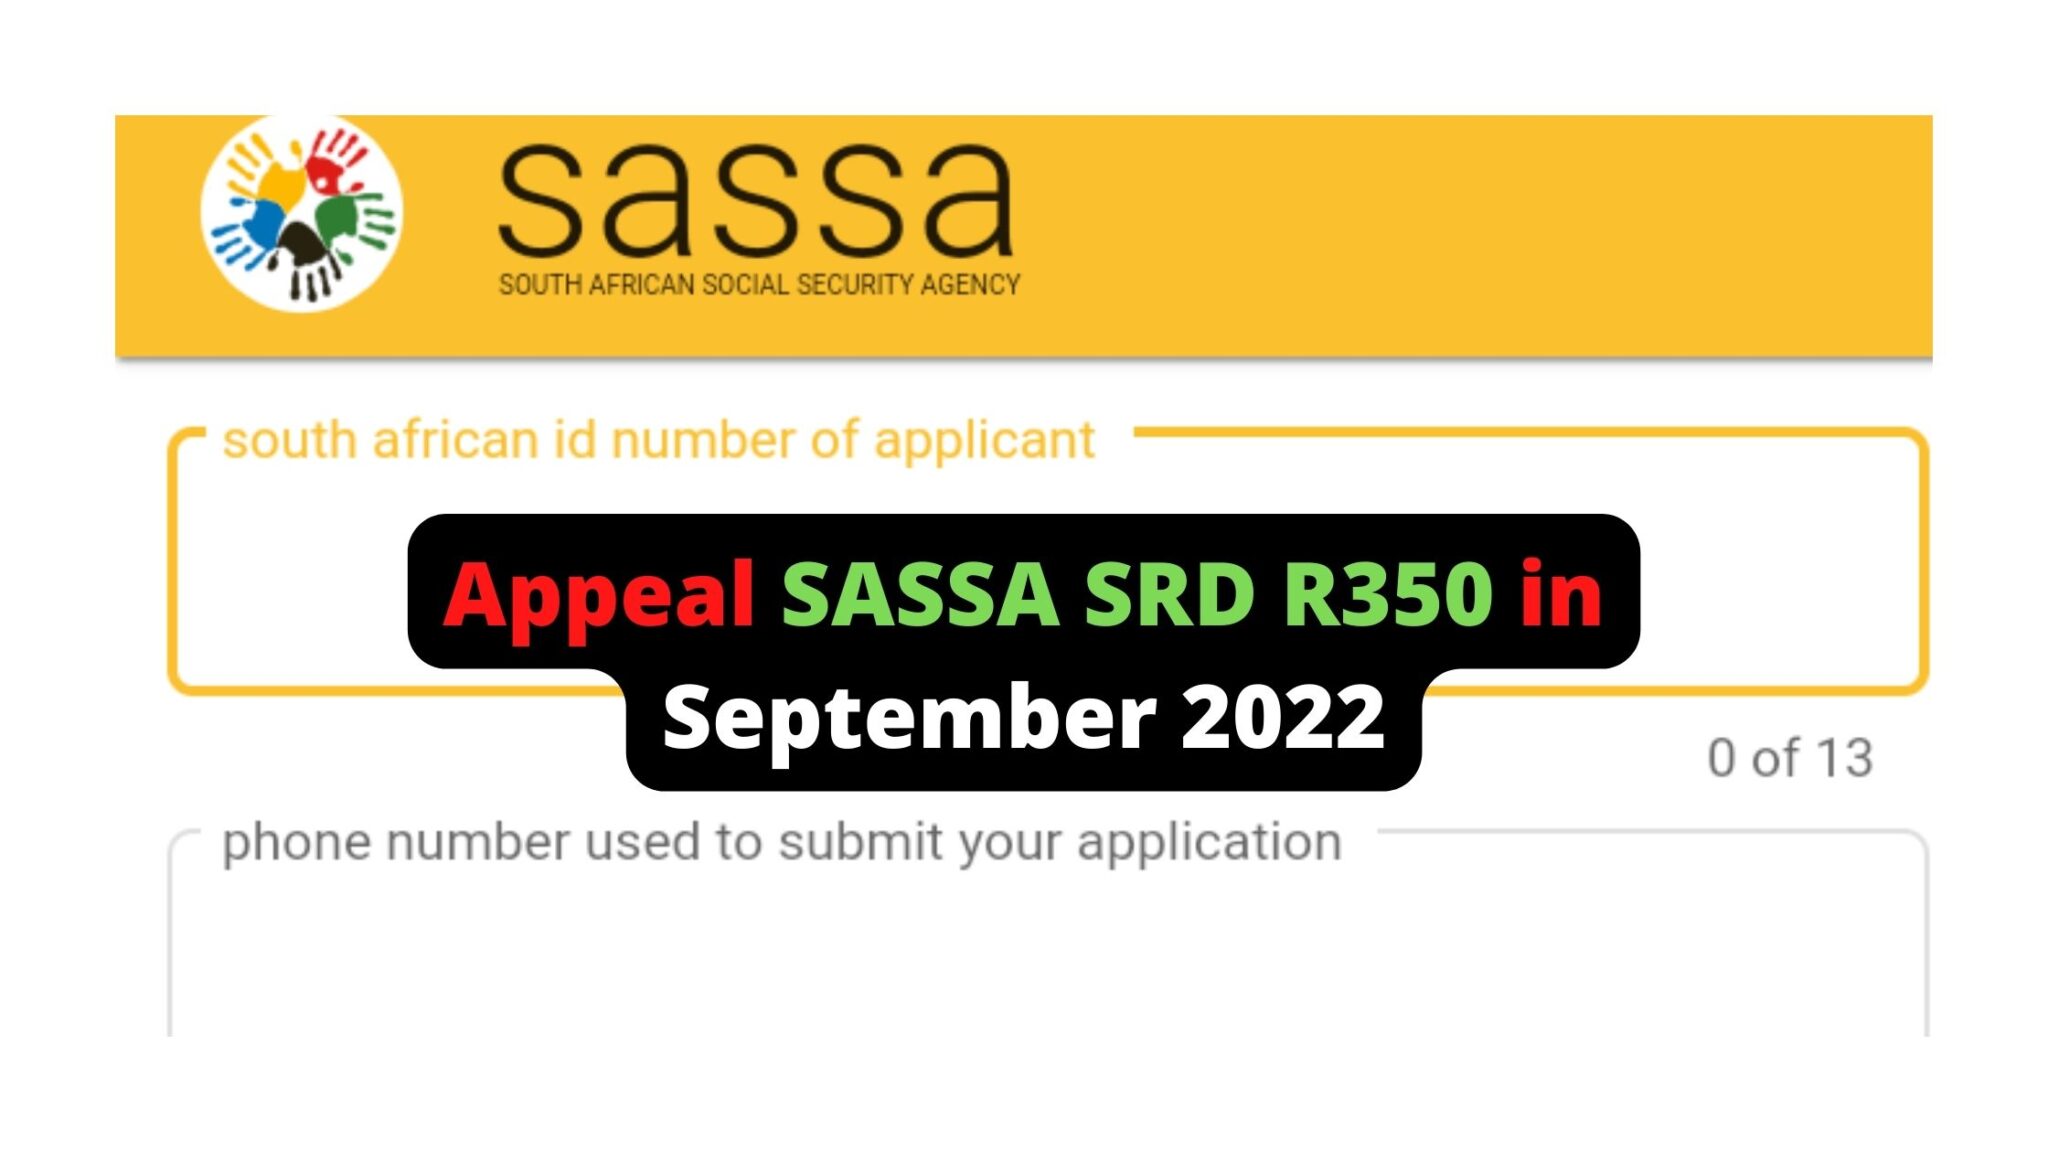 sassa-srd-r350-declined-appeal-and-get-approved-for-september-2022